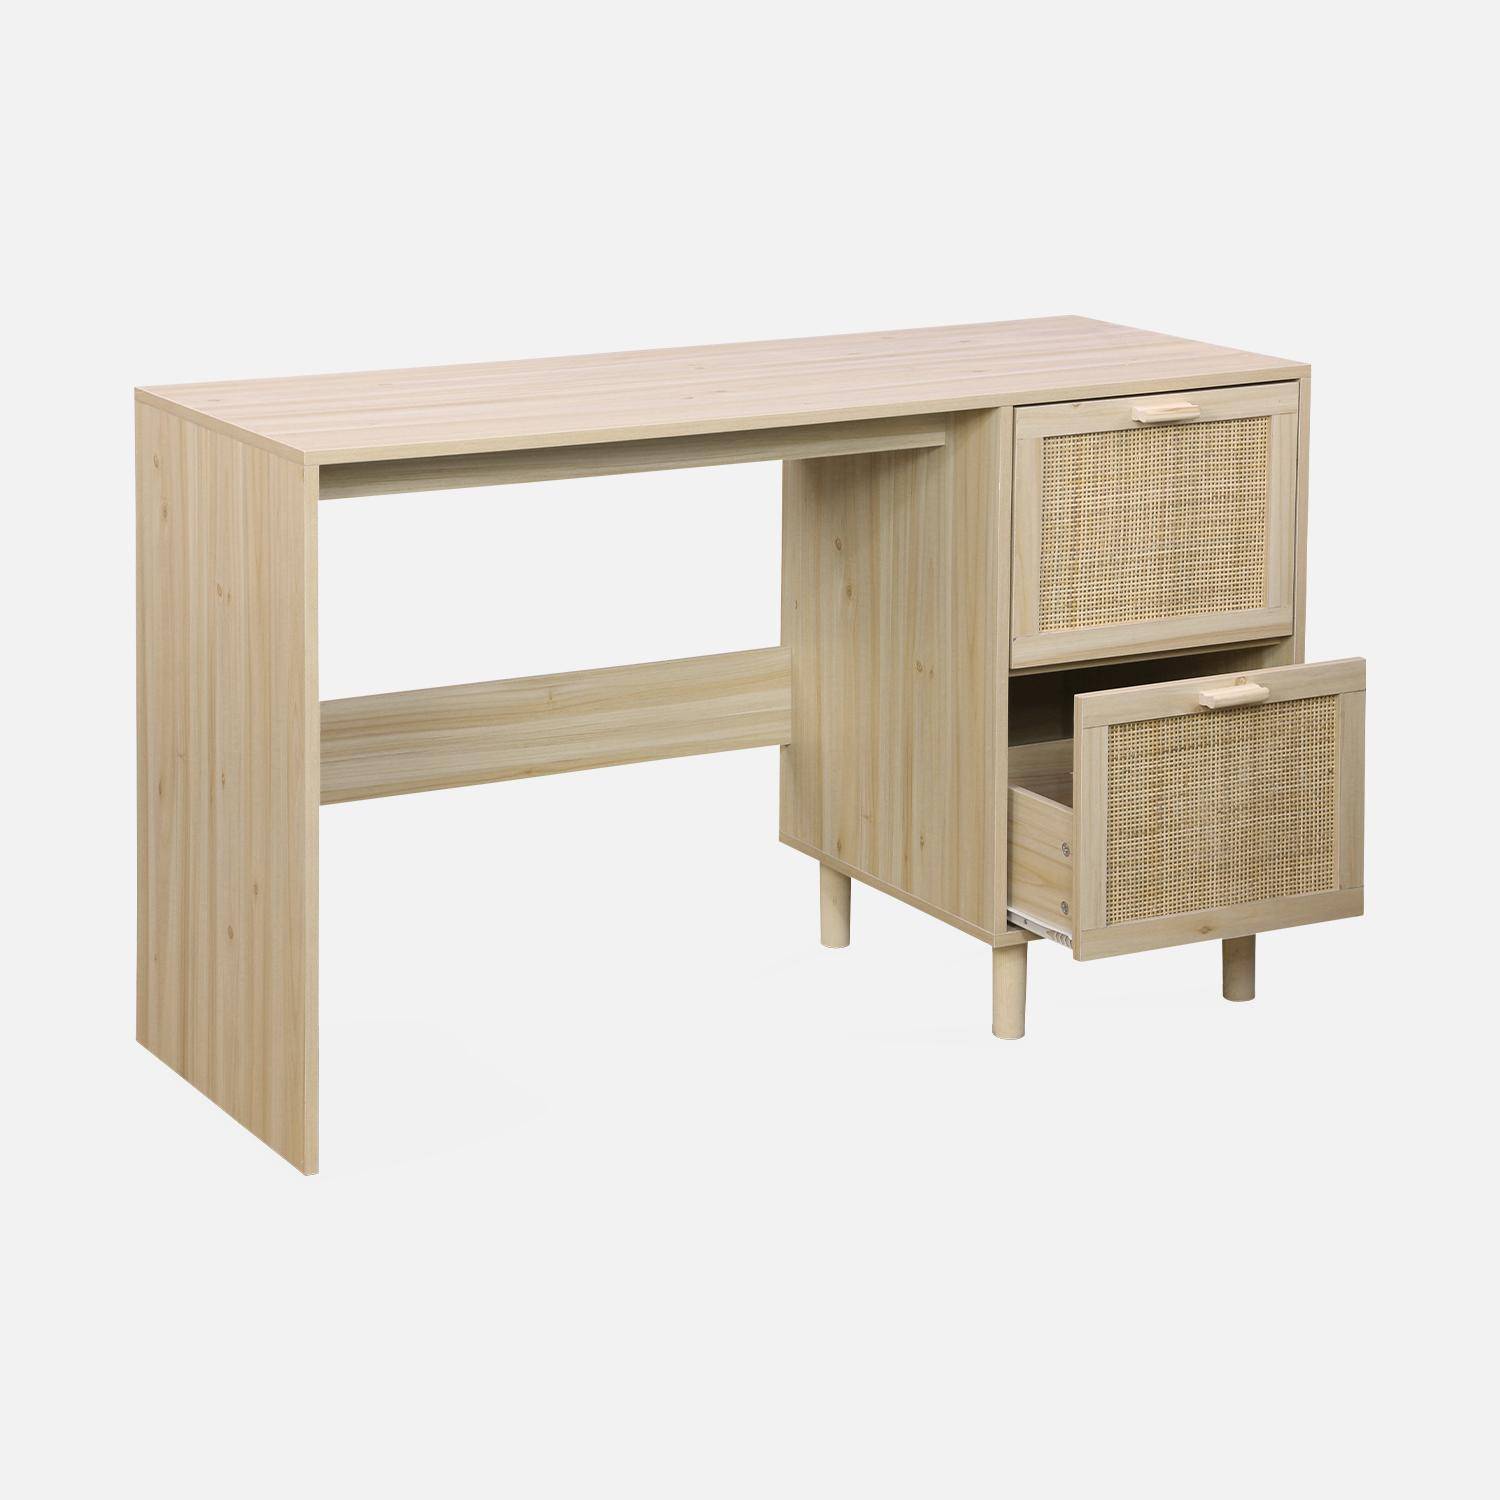 Woven rattan desk with 2 drawers, 120x48x75cm - Camargue - Natural Photo5